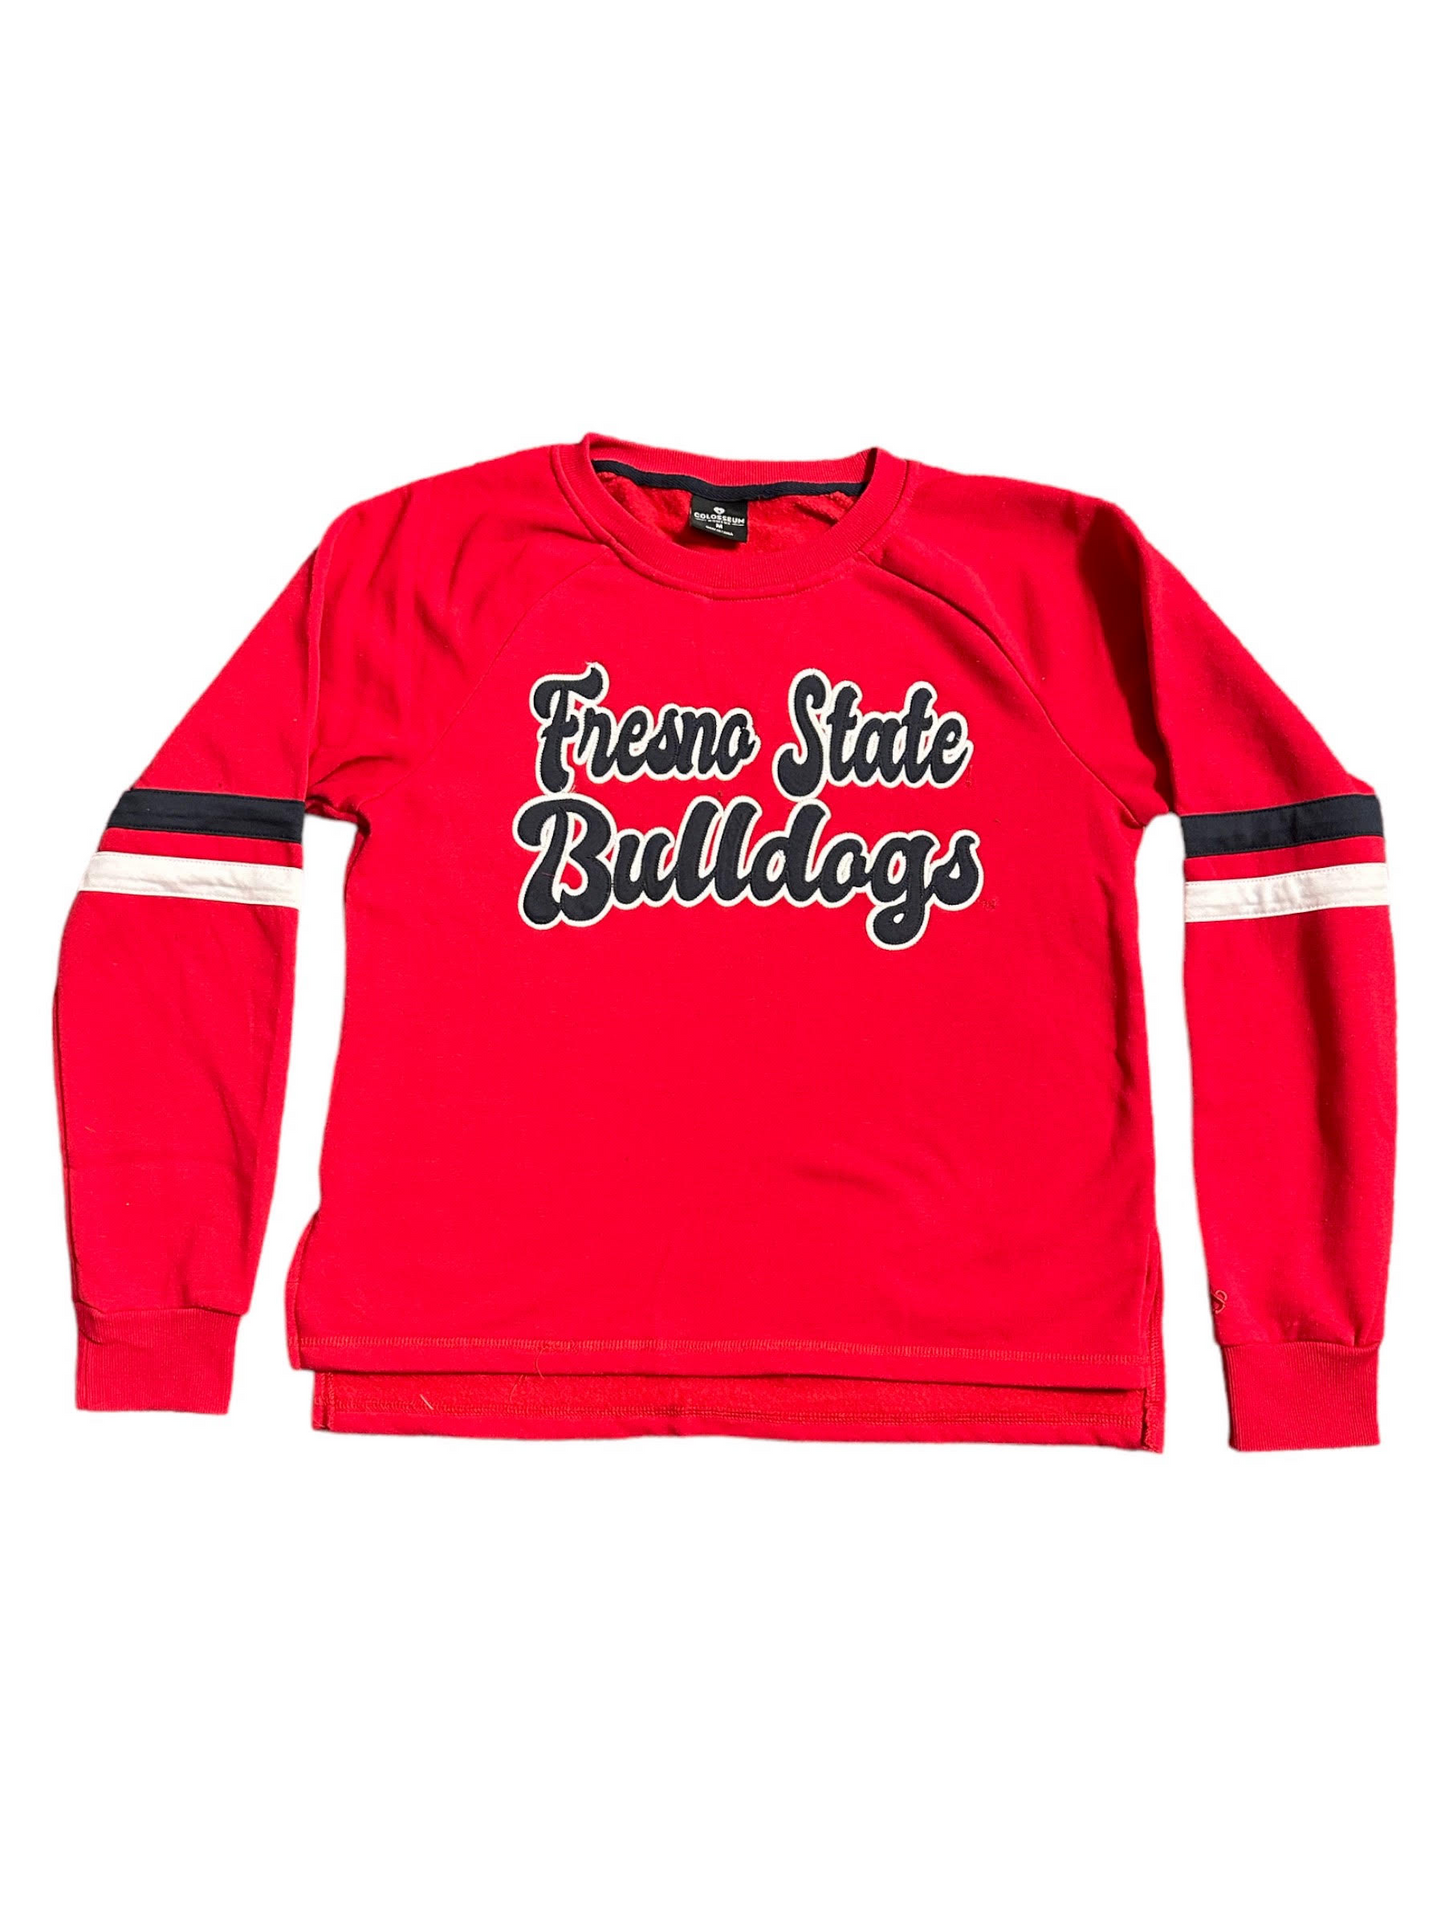 FRESNO STATE BULLDOGS WOMEN'S TALENT COMPETITION CREWNECK SWEATER